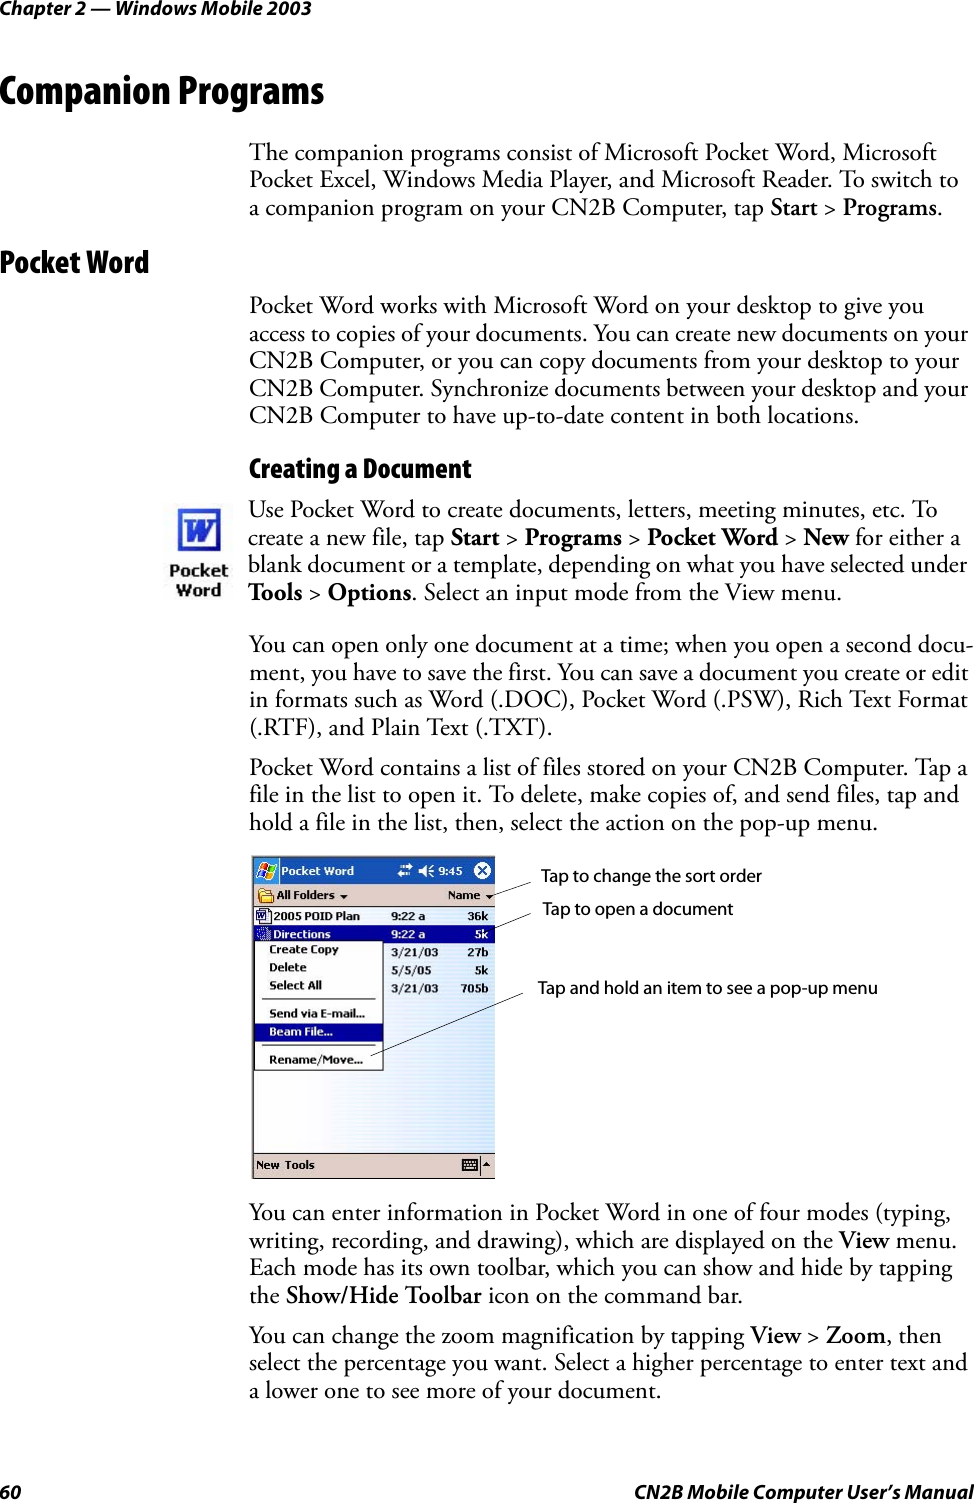 Chapter 2 — Windows Mobile 200360 CN2B Mobile Computer User’s ManualCompanion ProgramsThe companion programs consist of Microsoft Pocket Word, Microsoft Pocket Excel, Windows Media Player, and Microsoft Reader. To switch to a companion program on your CN2B Computer, tap Start &gt; Programs.Pocket WordPocket Word works with Microsoft Word on your desktop to give you access to copies of your documents. You can create new documents on your CN2B Computer, or you can copy documents from your desktop to your CN2B Computer. Synchronize documents between your desktop and your CN2B Computer to have up-to-date content in both locations.Creating a DocumentYou can open only one document at a time; when you open a second docu-ment, you have to save the first. You can save a document you create or edit in formats such as Word (.DOC), Pocket Word (.PSW), Rich Text Format (.RTF), and Plain Text (.TXT).Pocket Word contains a list of files stored on your CN2B Computer. Tap a file in the list to open it. To delete, make copies of, and send files, tap and hold a file in the list, then, select the action on the pop-up menu.You can enter information in Pocket Word in one of four modes (typing, writing, recording, and drawing), which are displayed on the View menu. Each mode has its own toolbar, which you can show and hide by tapping the Show/Hide Toolbar icon on the command bar.You can change the zoom magnification by tapping View &gt; Zoom, then select the percentage you want. Select a higher percentage to enter text and a lower one to see more of your document.Use Pocket Word to create documents, letters, meeting minutes, etc. To create a new file, tap Start &gt; Programs &gt; Pocket Word &gt; New for either a blank document or a template, depending on what you have selected under Tools &gt; Options. Select an input mode from the View menu.Tap to change the sort orderTap to open a documentTap and hold an item to see a pop-up menu